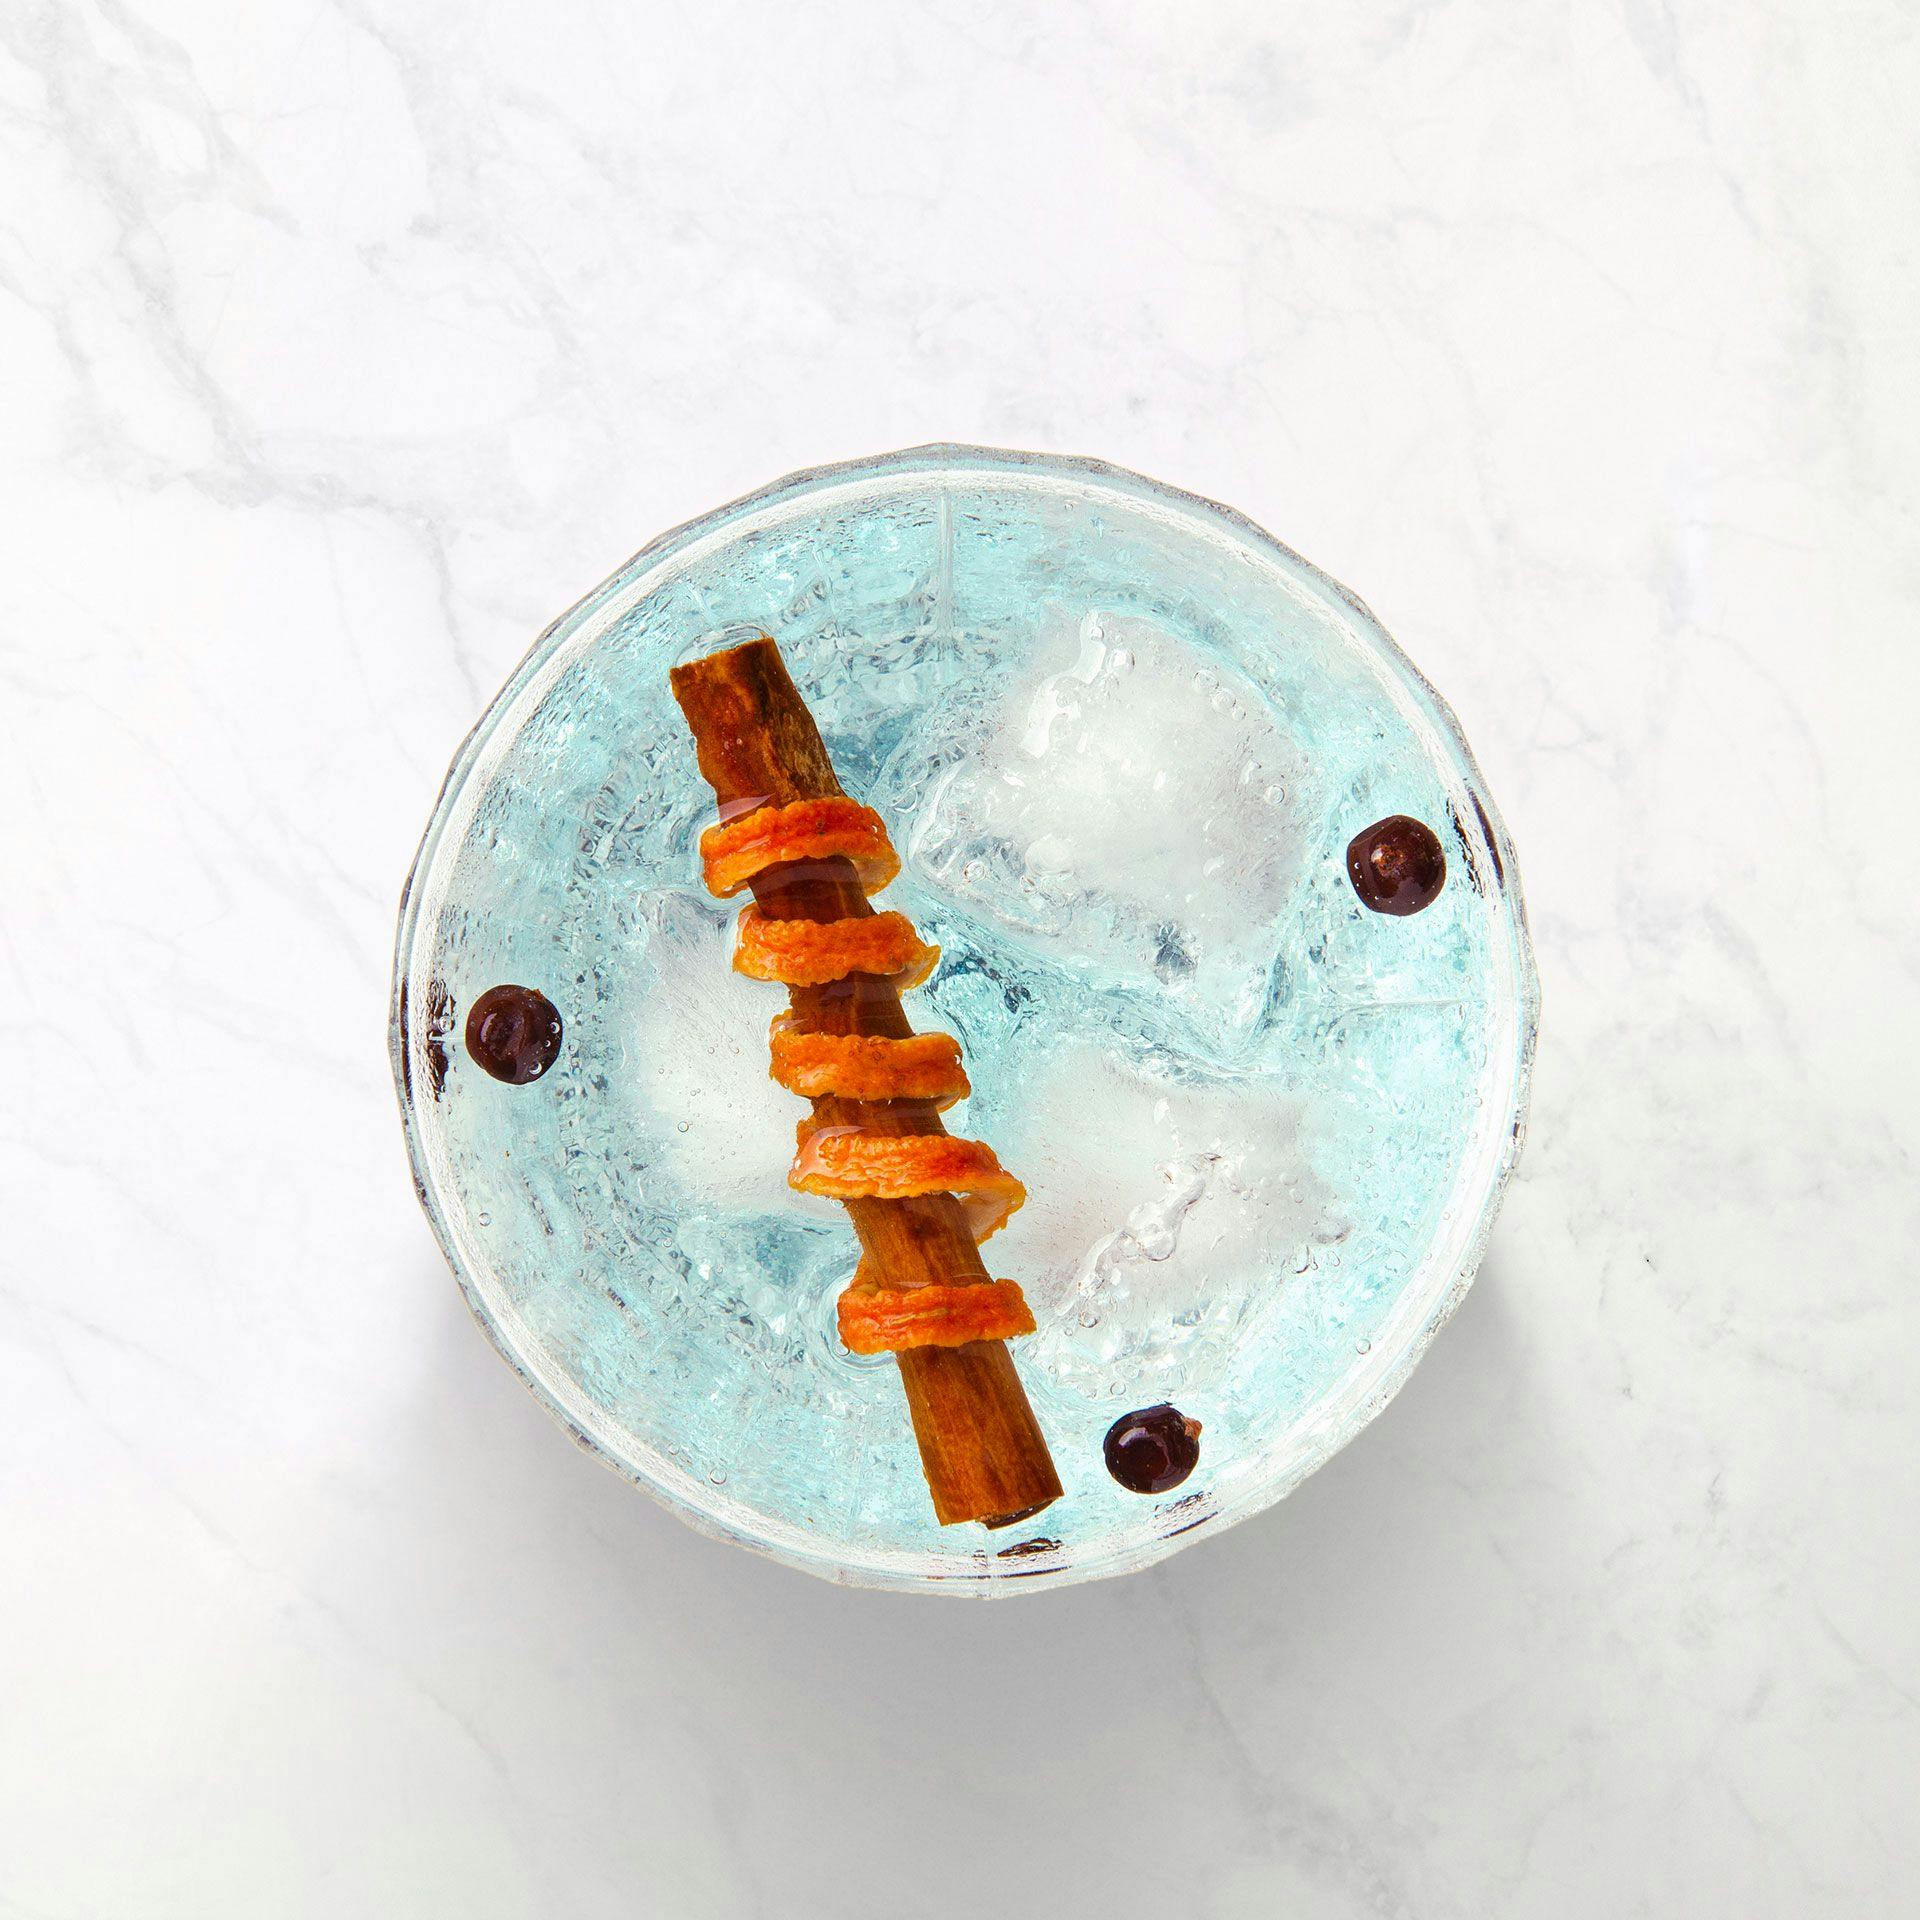 A top view of a clear drink with ice and garnish.